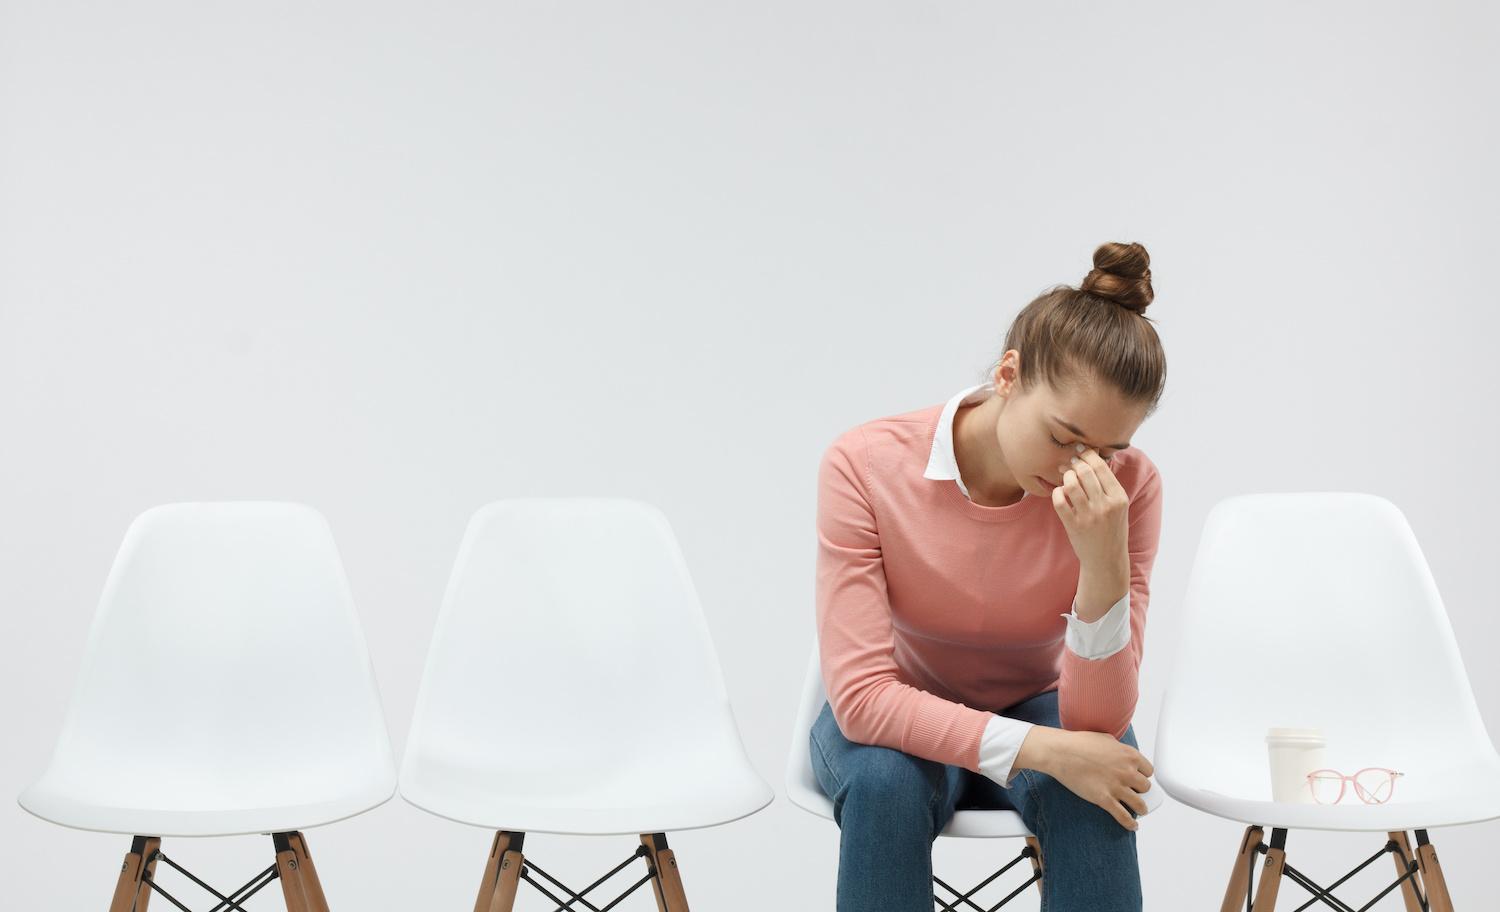 Five answers that can get you rejected from a job at the interview stage